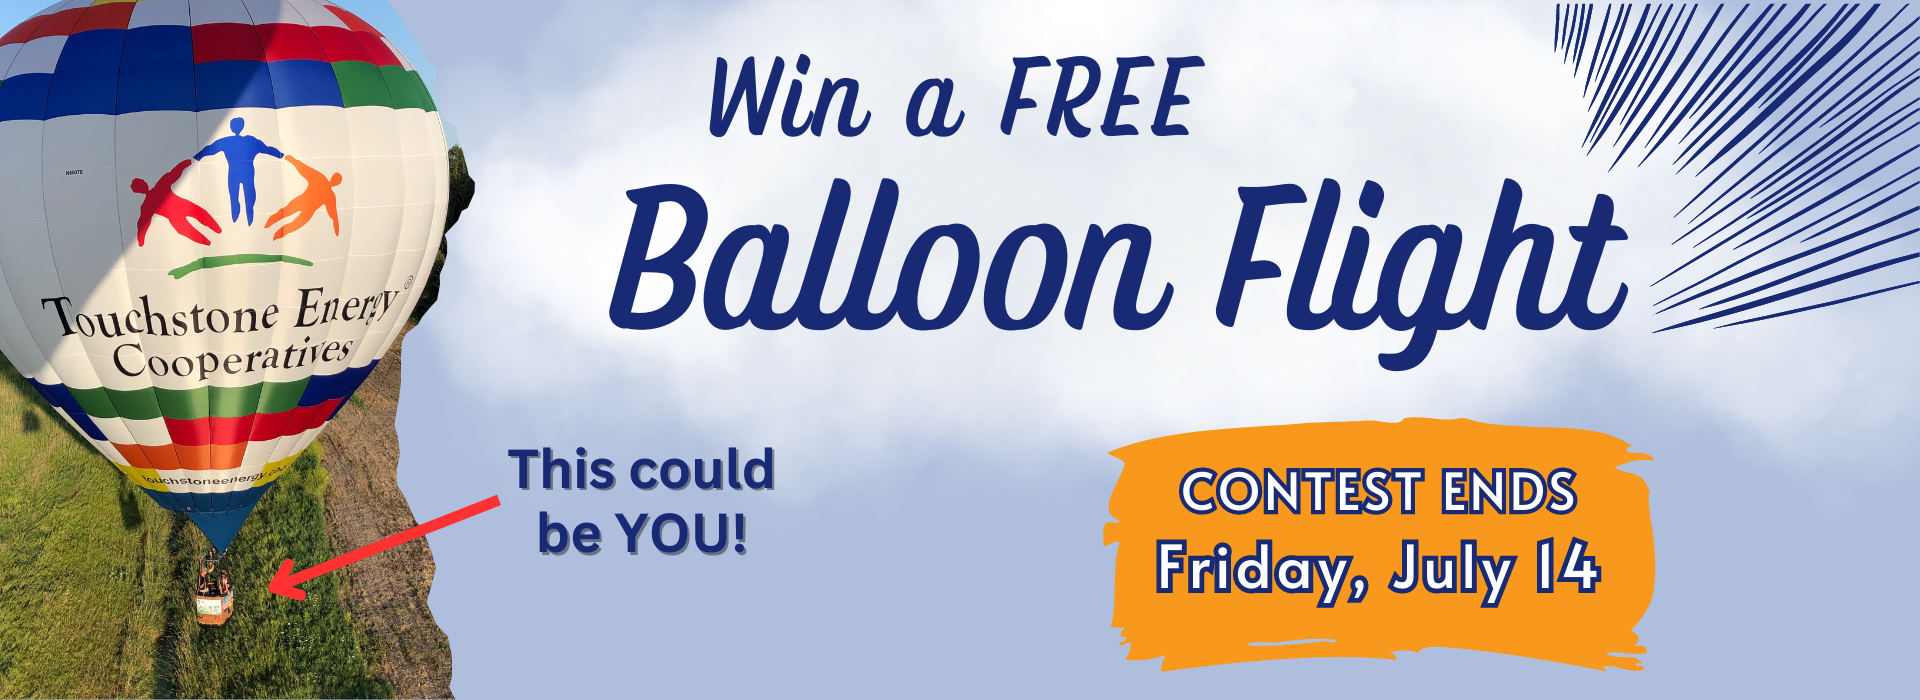 hot air balloon and announcement of free flight contest